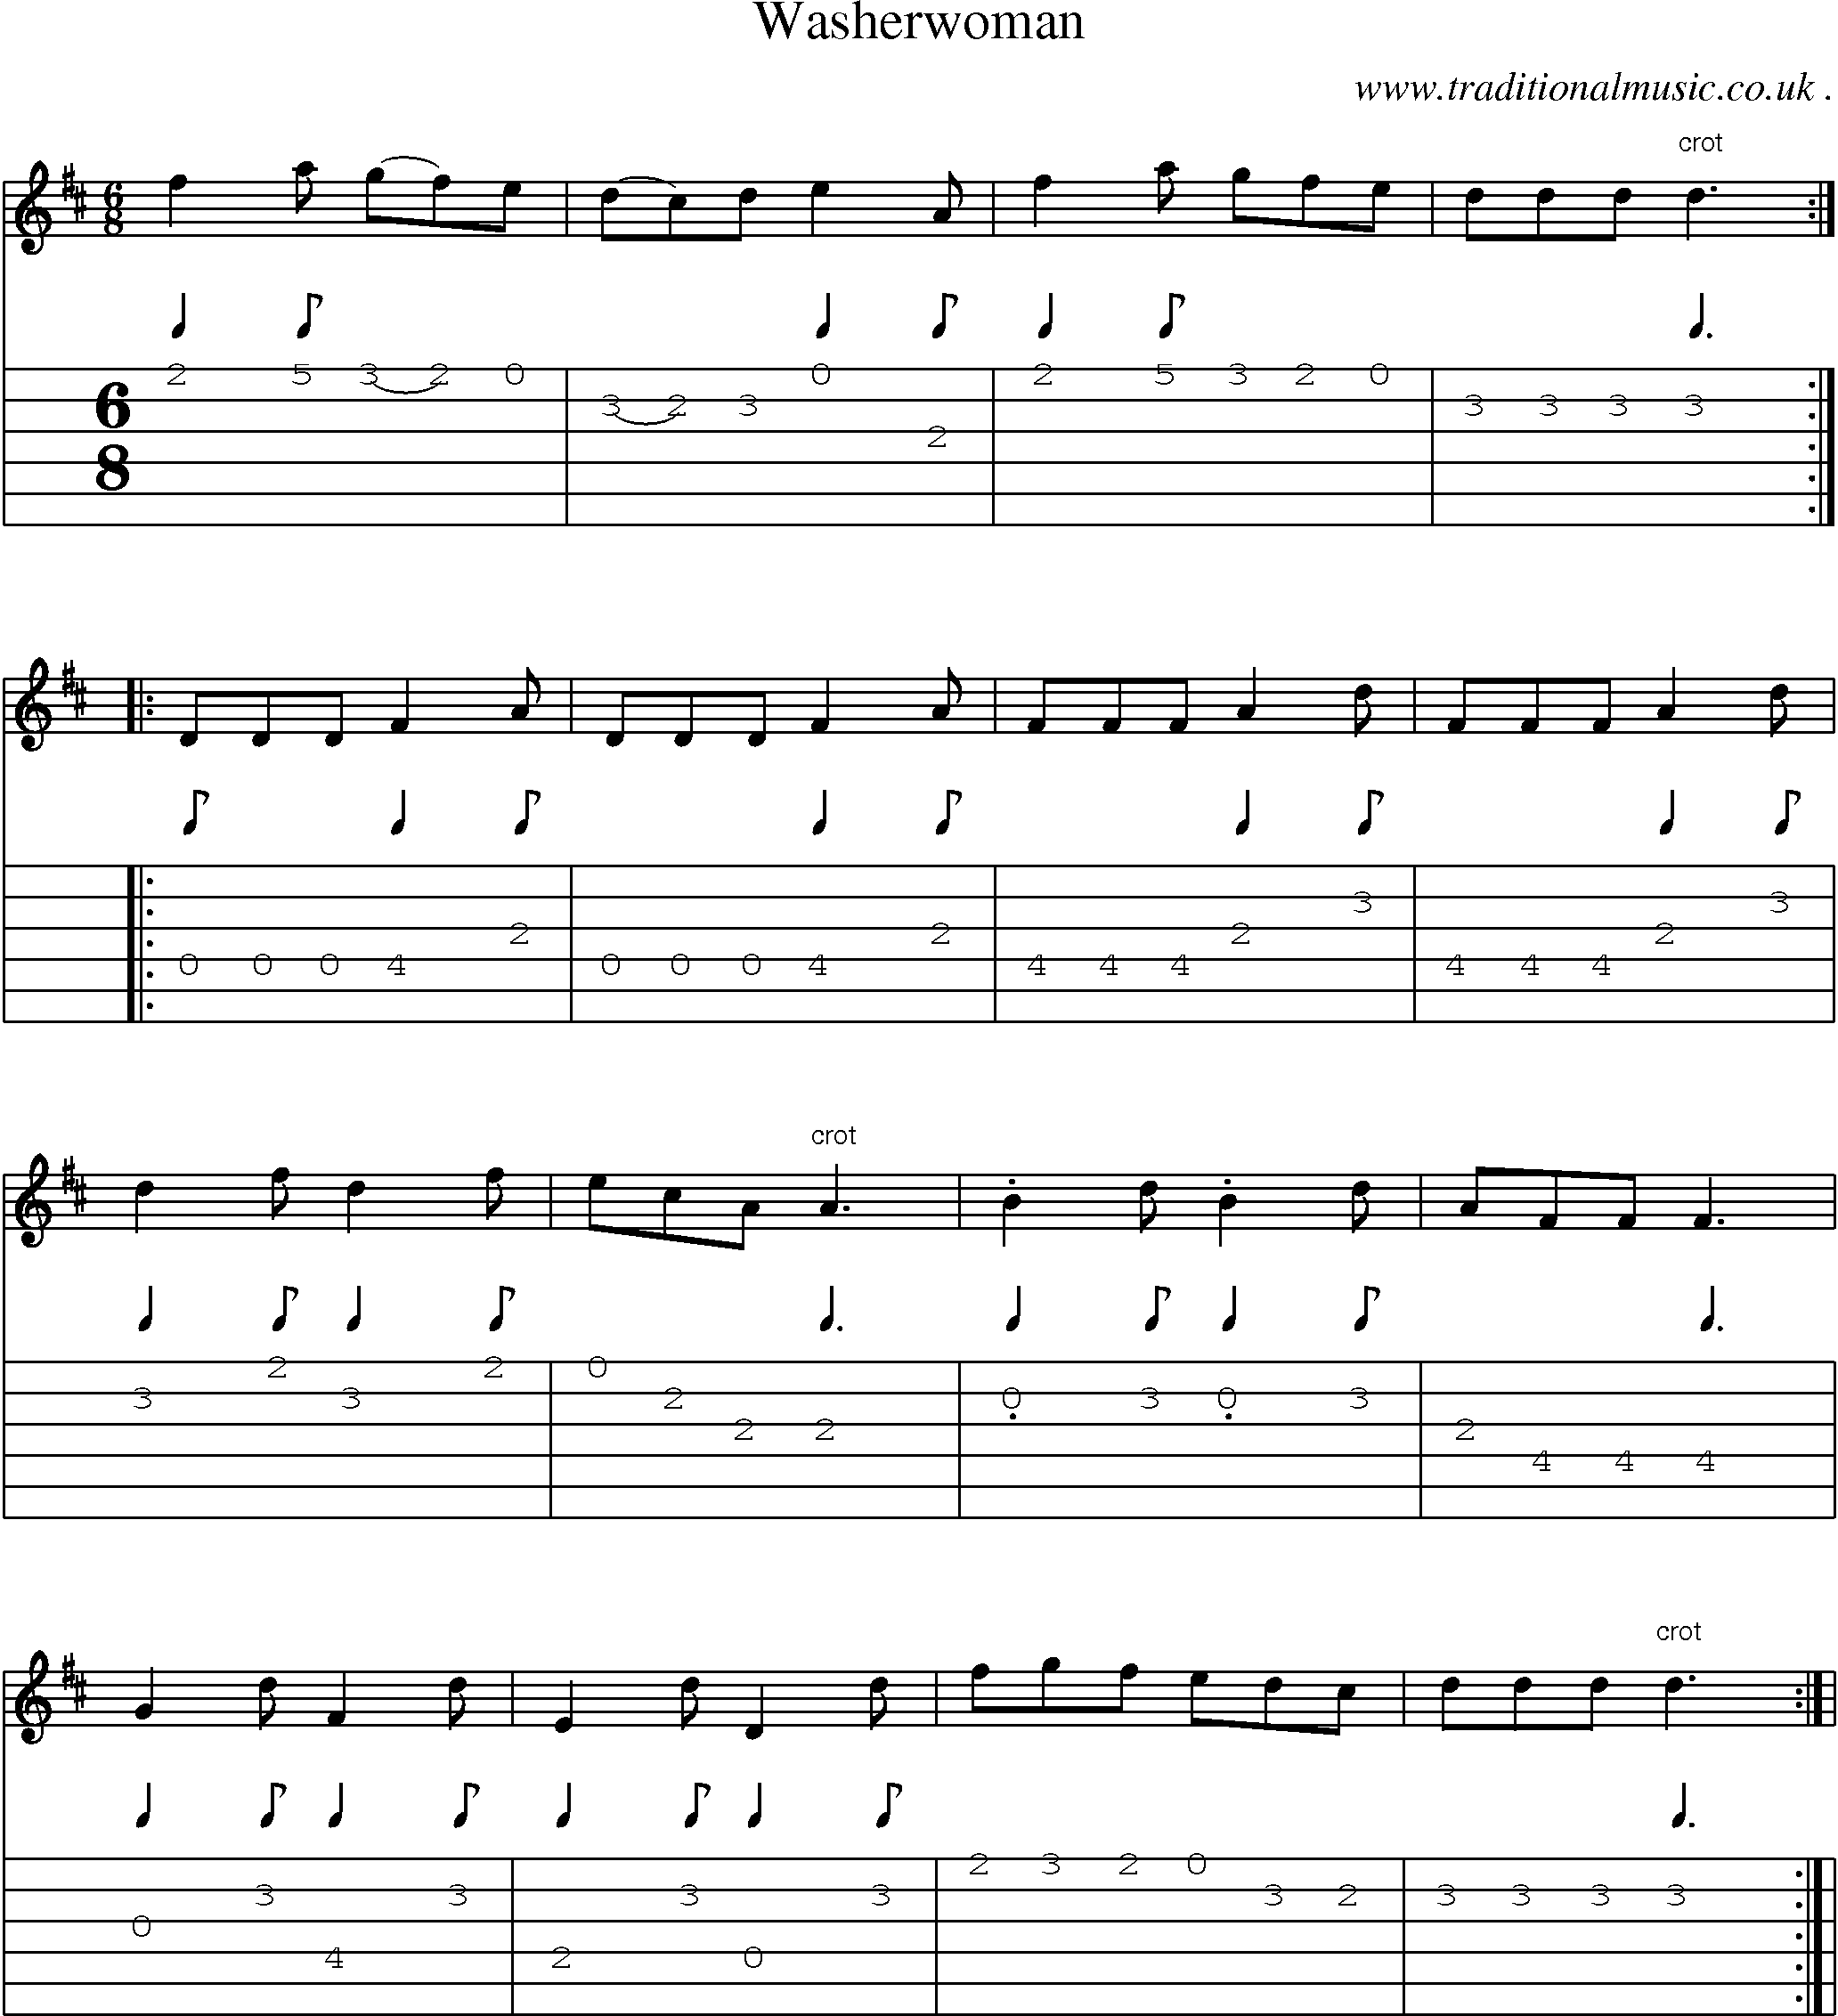 Sheet-Music and Guitar Tabs for Washerwoman